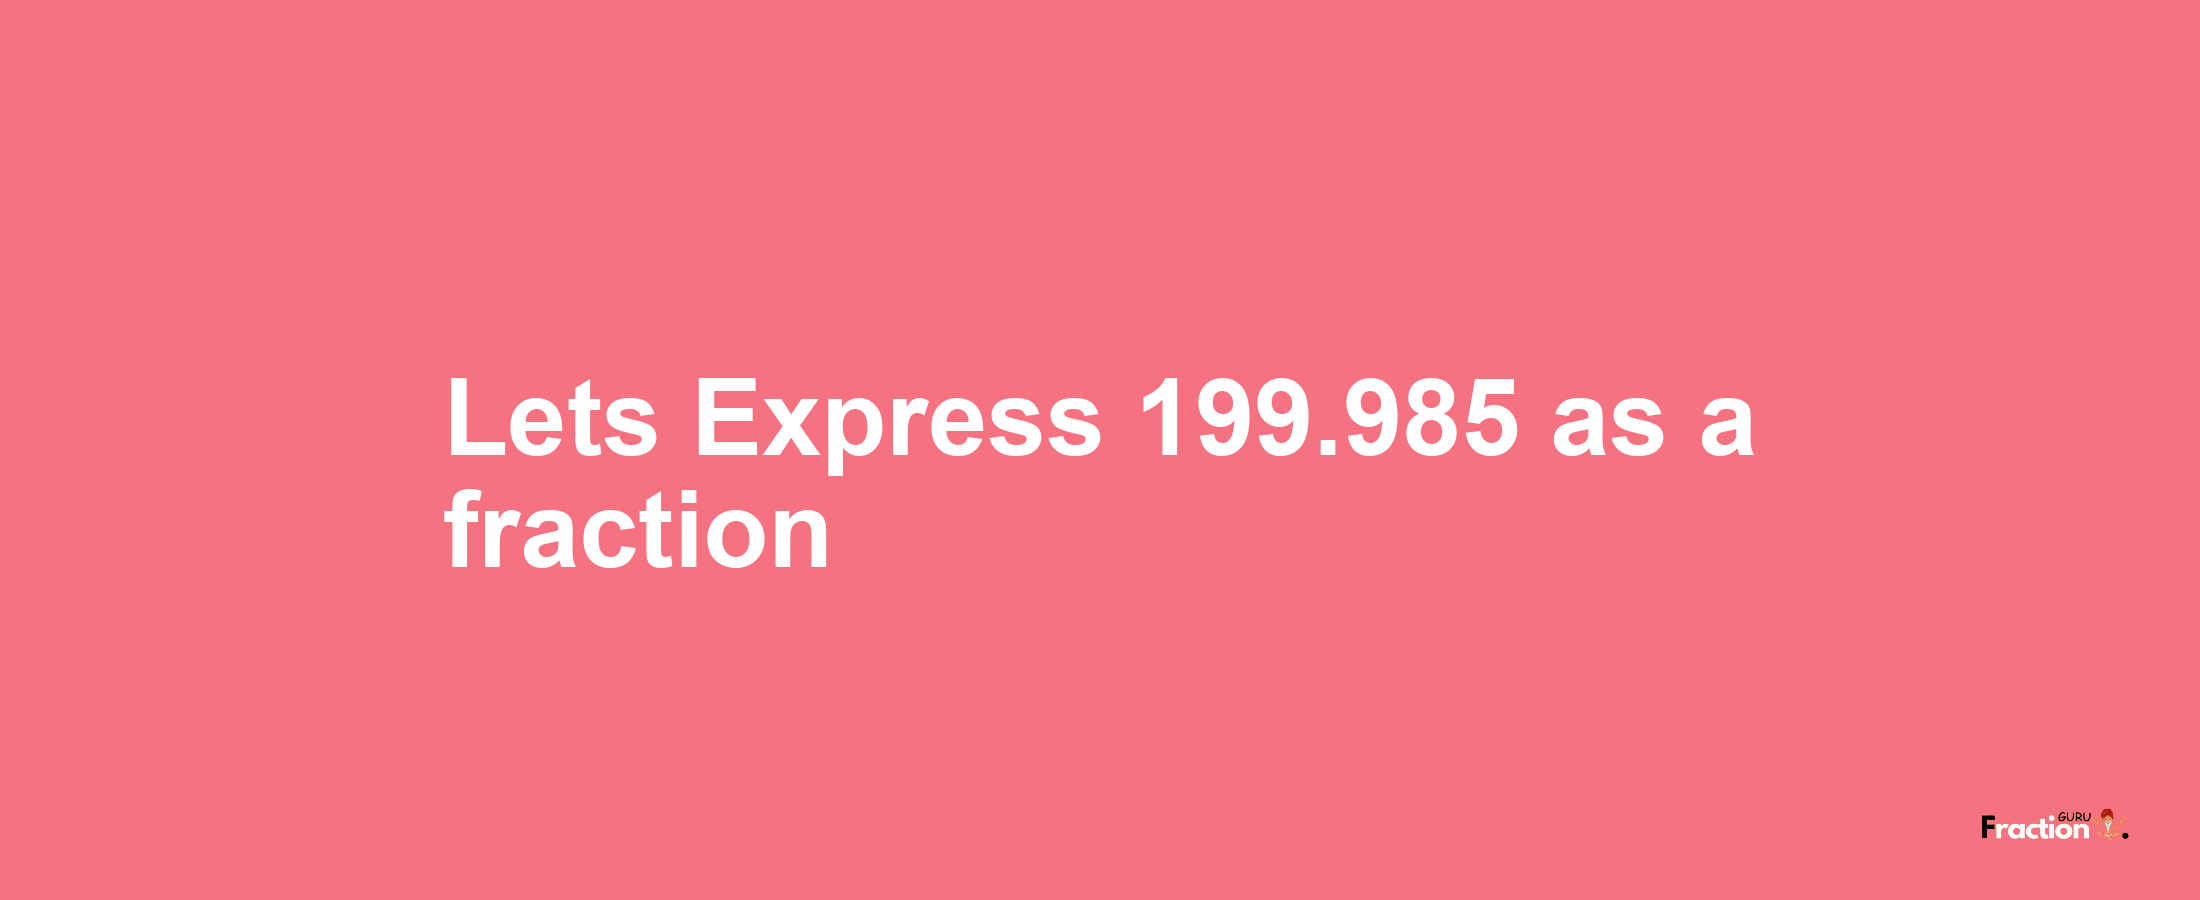 Lets Express 199.985 as afraction